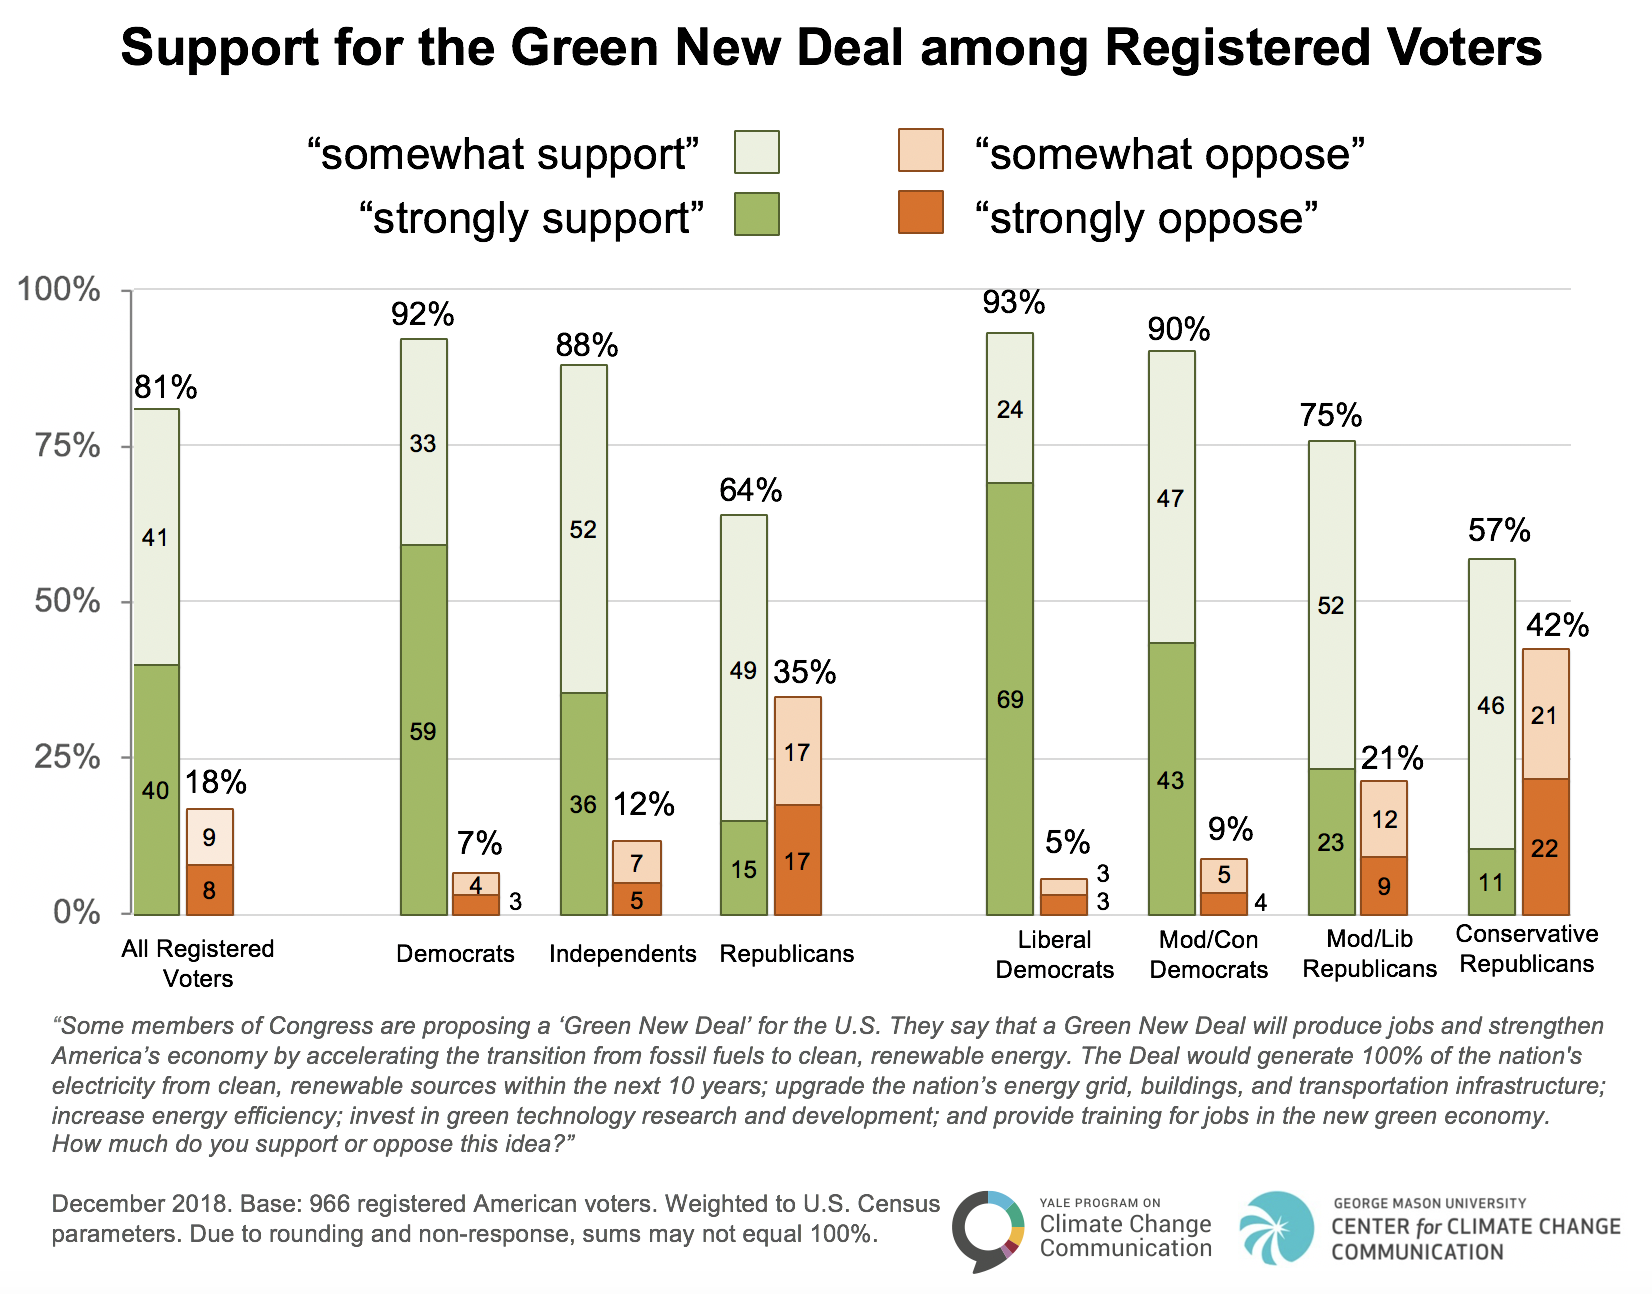 Green New Deal support among registered U.S. voters